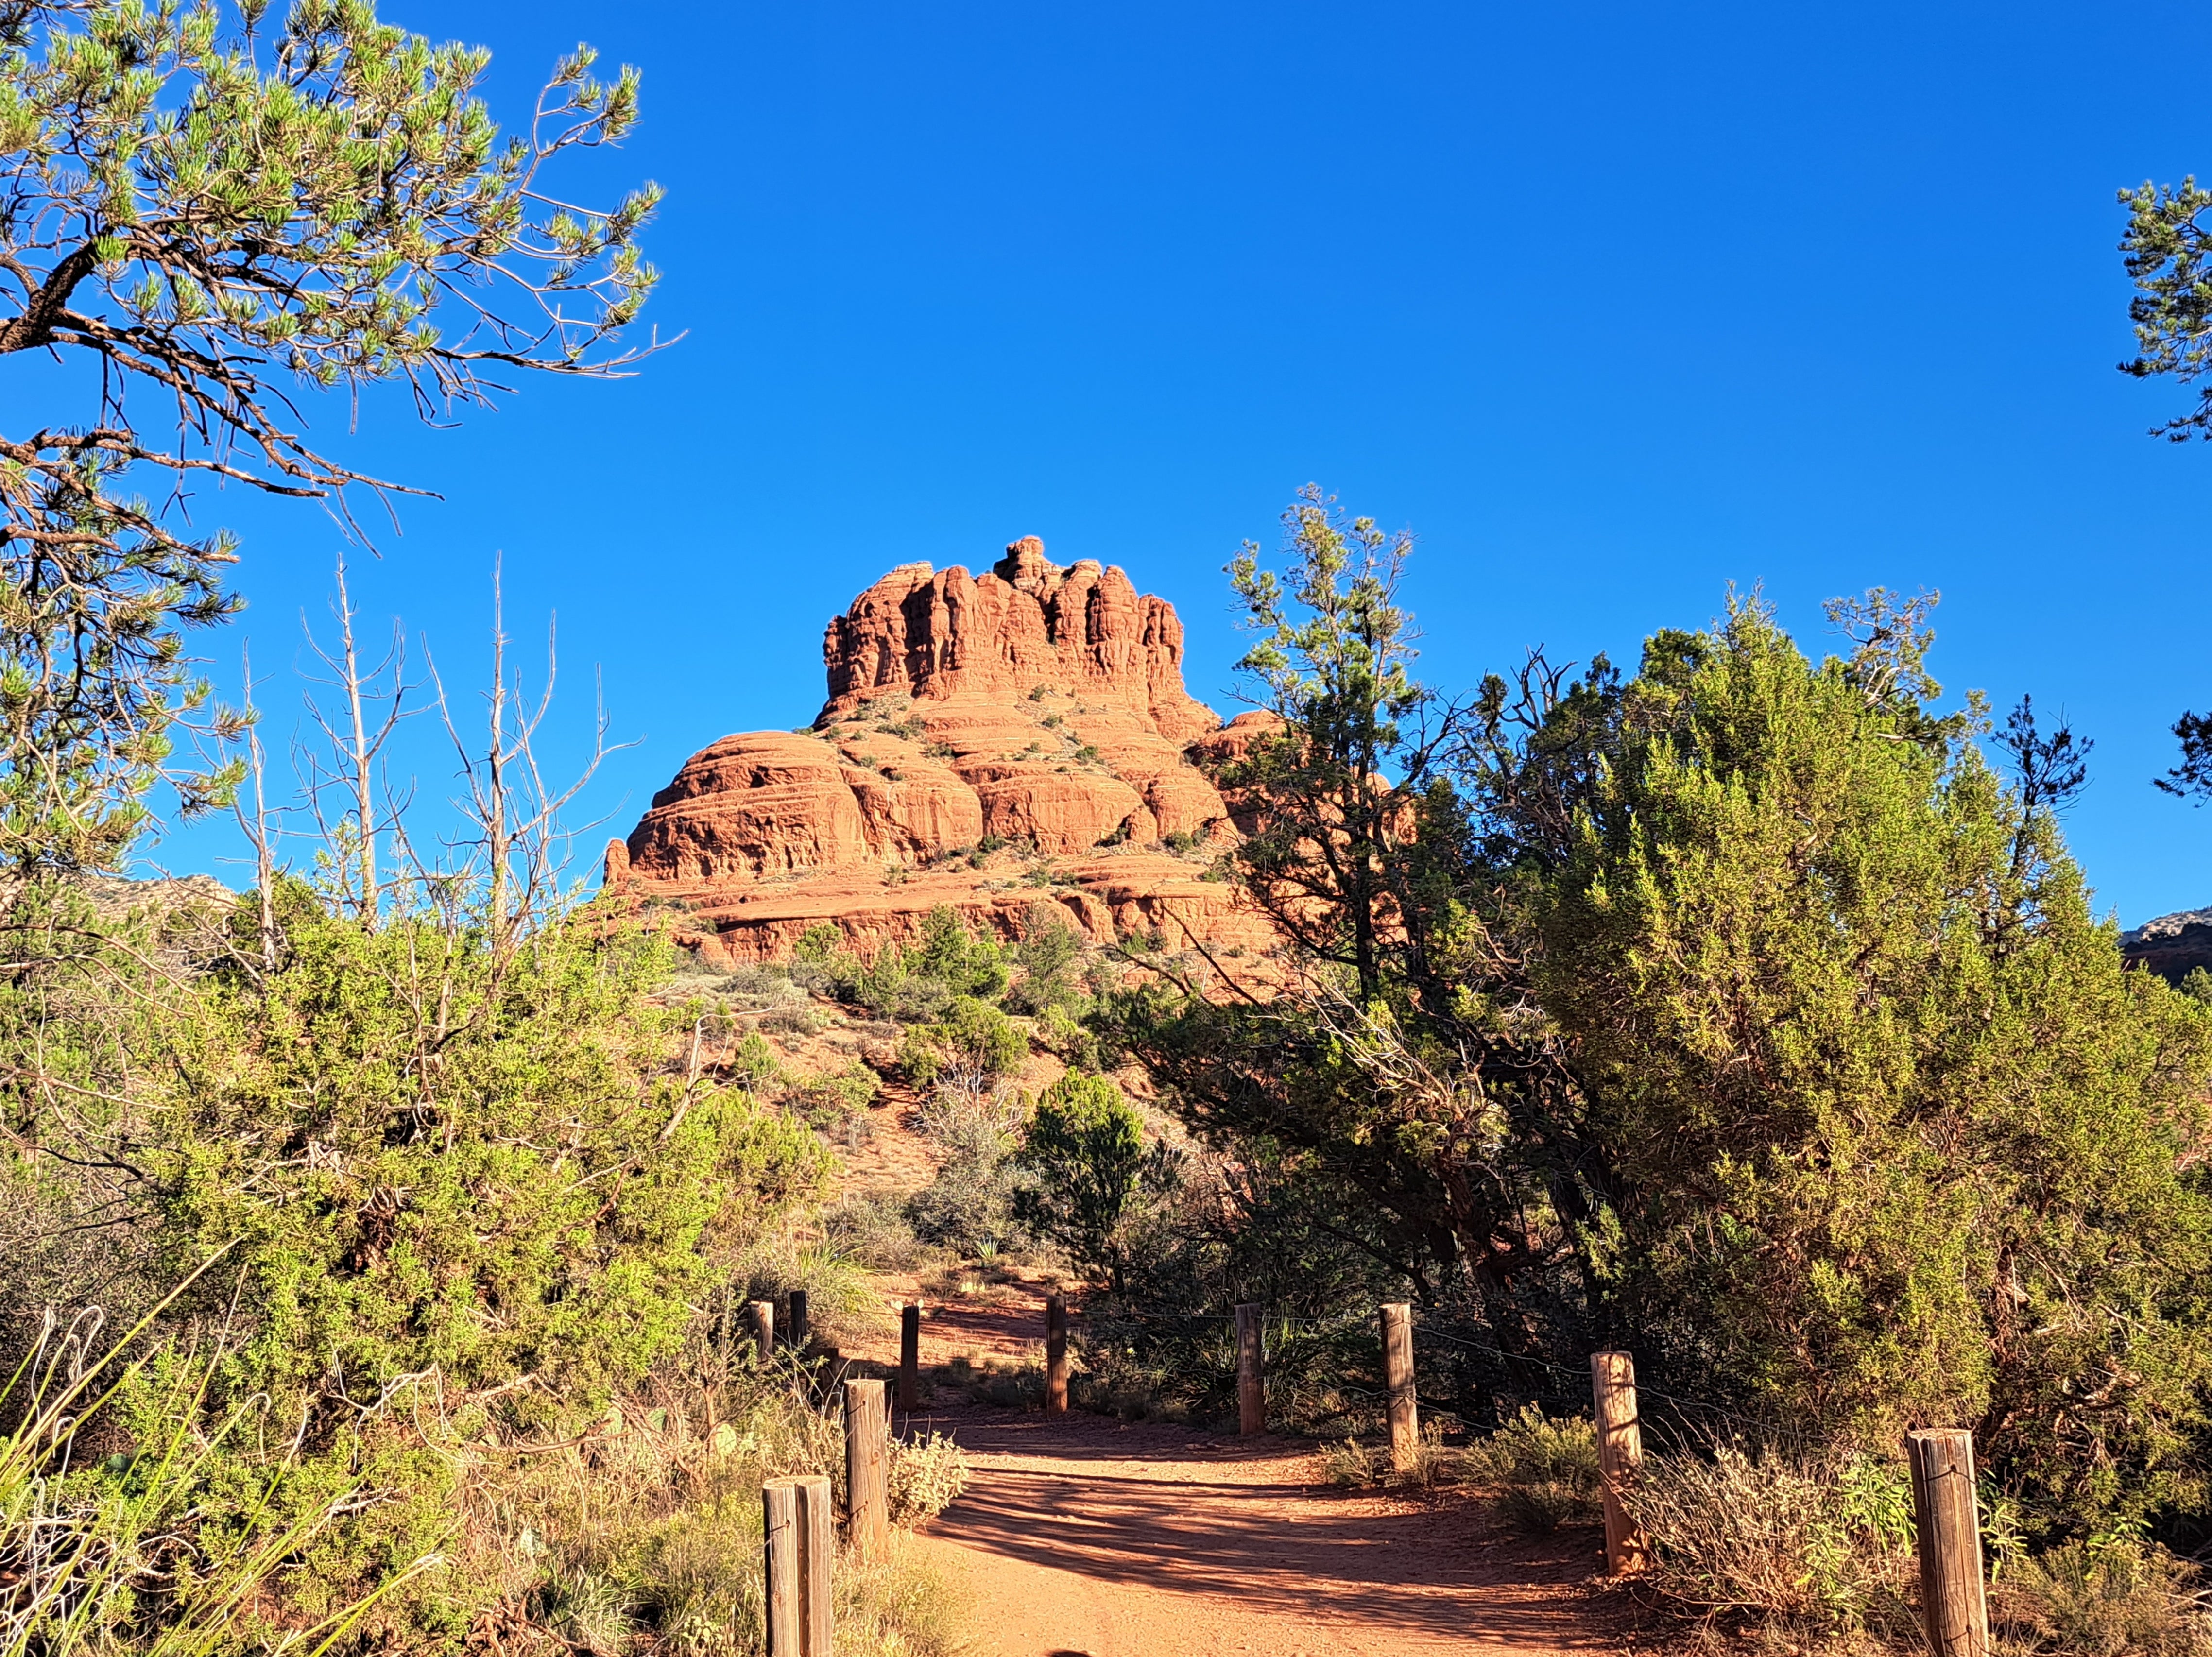 The red rocks of Sedona, believed to be home to ‘energy vortexes'